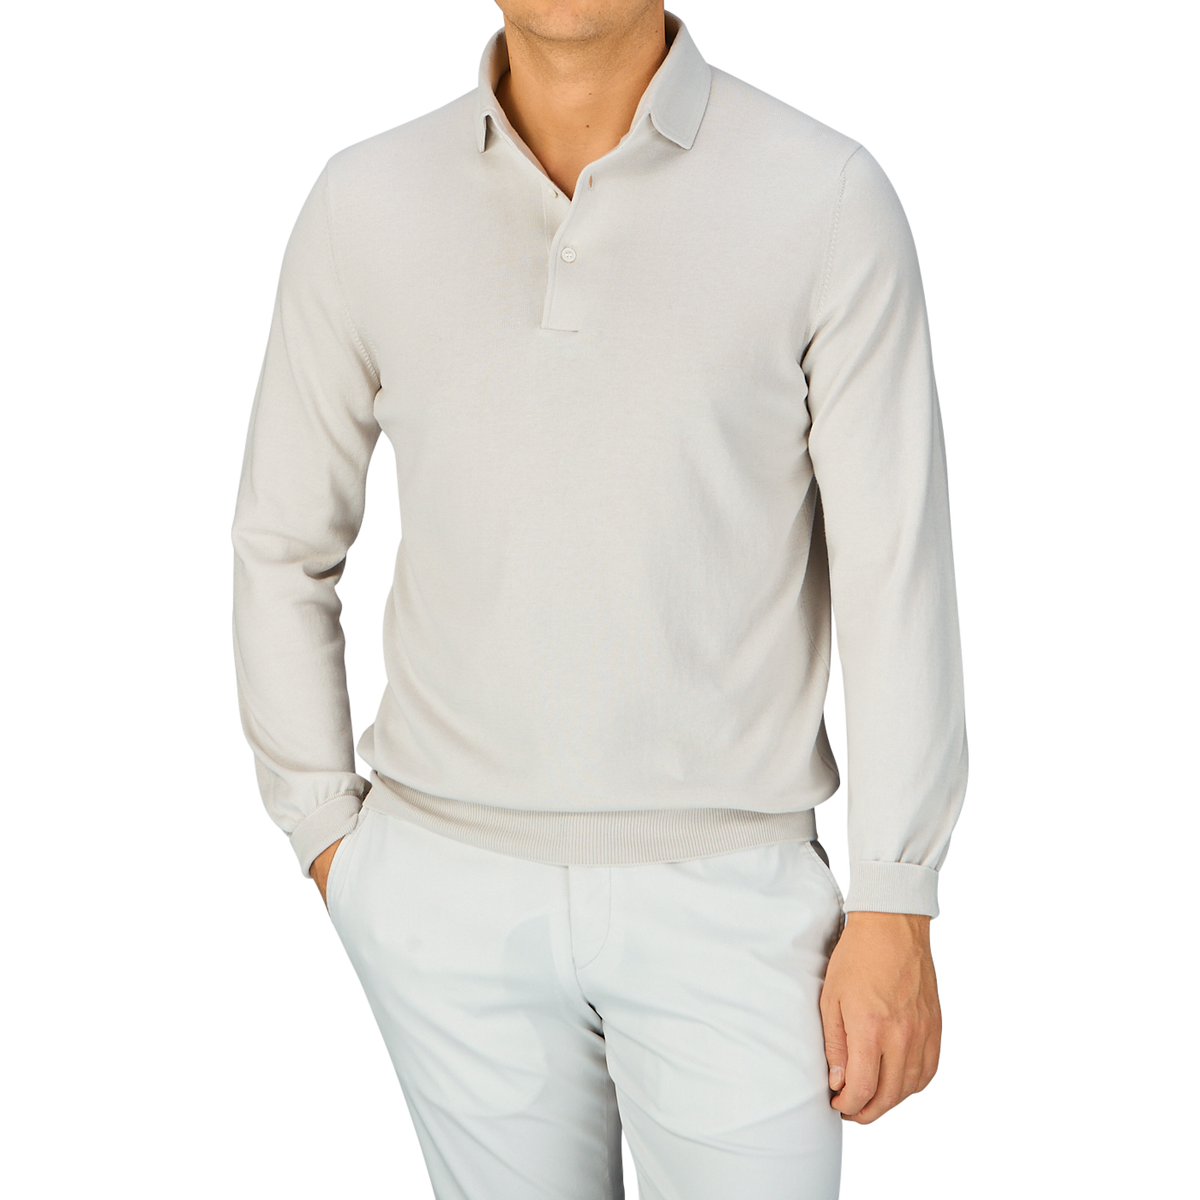 Man wearing a Taupe Beige Organic Cotton LS Polo Shirt by Gran Sasso and white pants against a blue background.